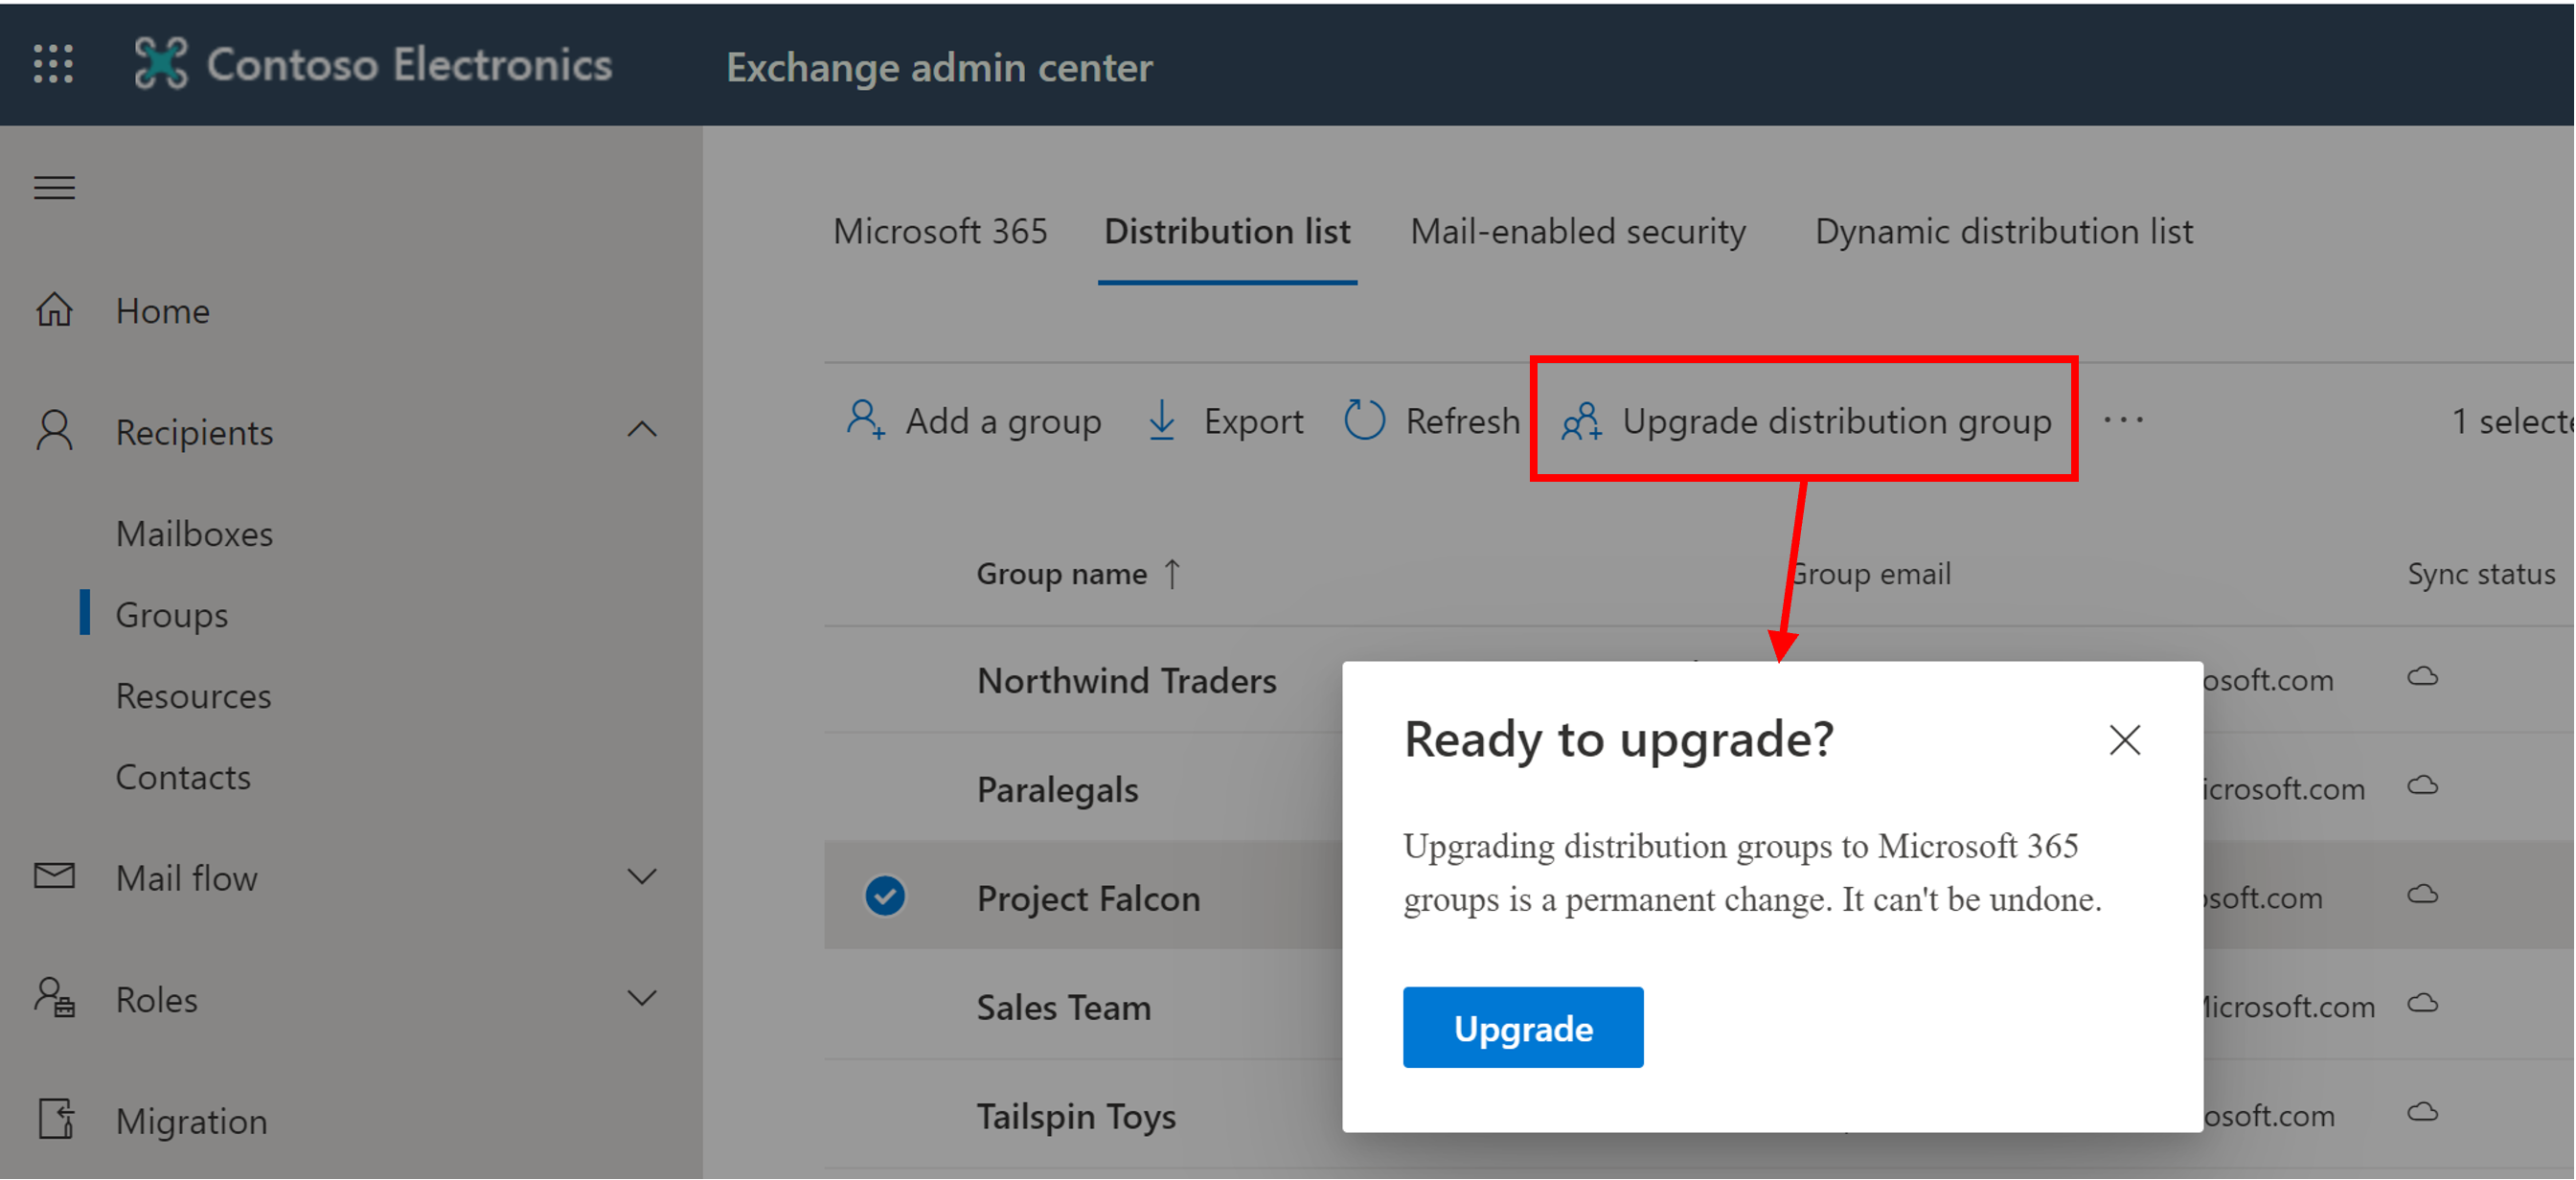 Screenshot of the Upgrade Distribution group dialog from Exchange admin center.